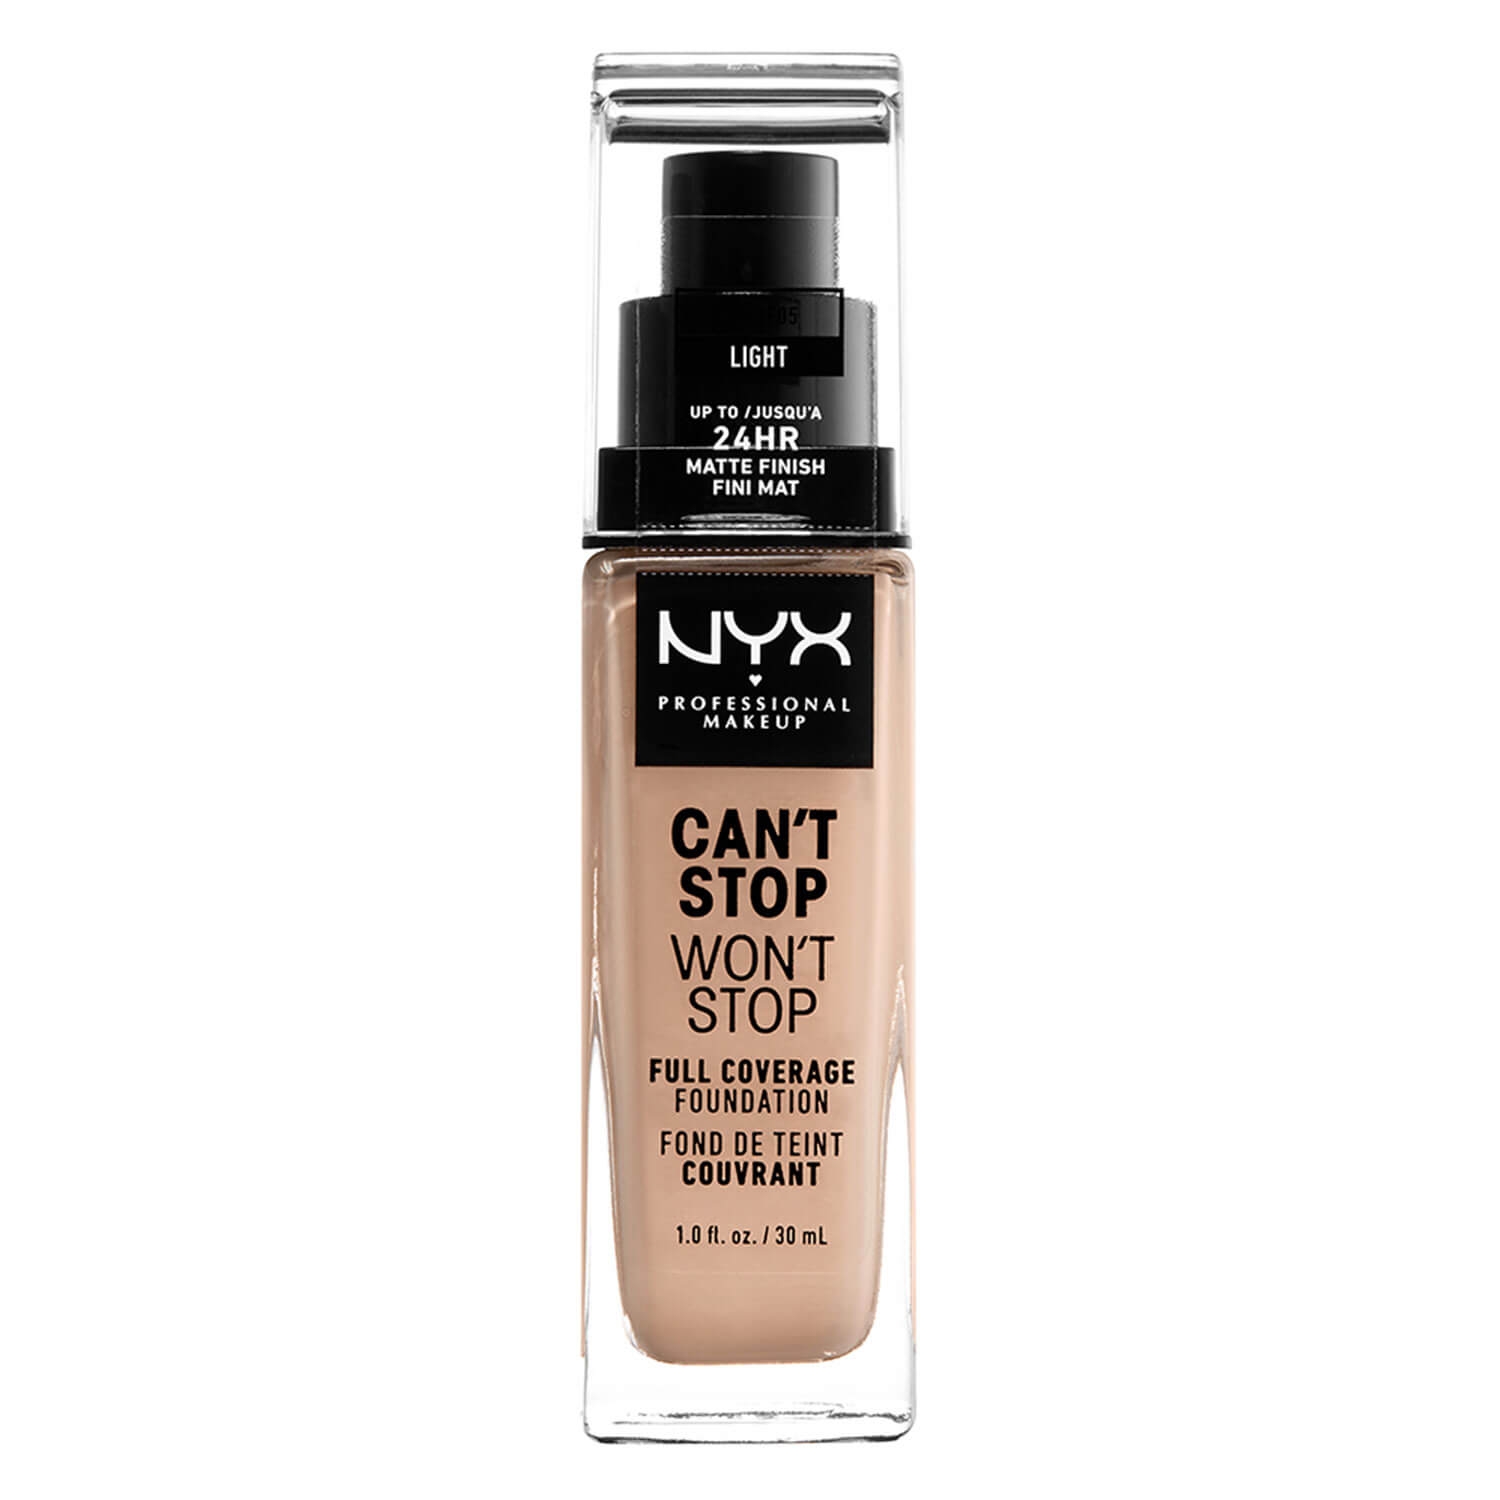 Product image from Can't Stop Won't Stop - Full Coverage Foundation Light